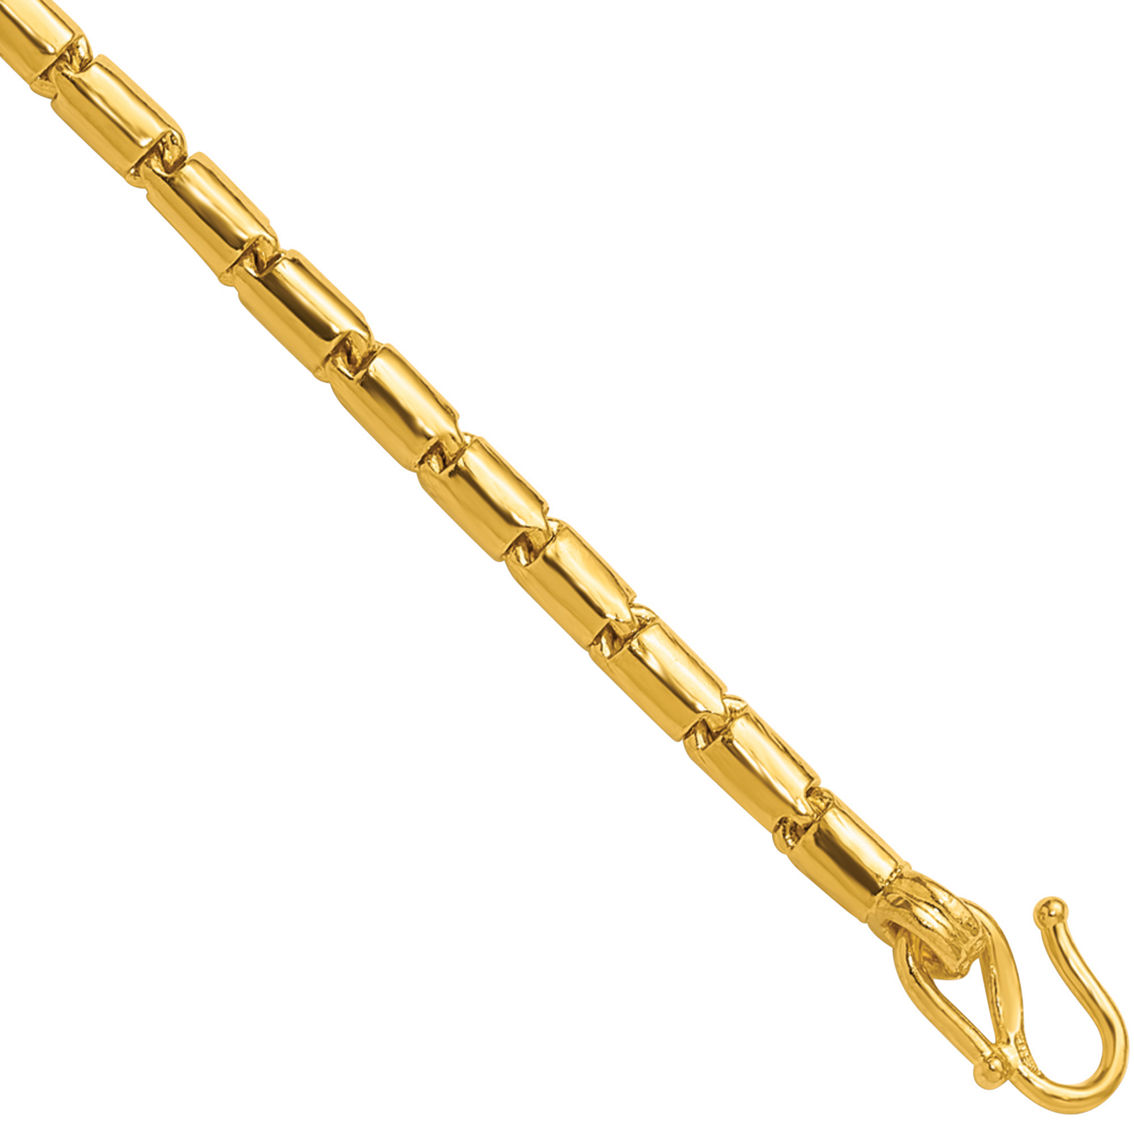 24K Pure Gold 3.2mm Solid Medium Round Barrel Link Chain 8 in. Bracelet - Image 3 of 5